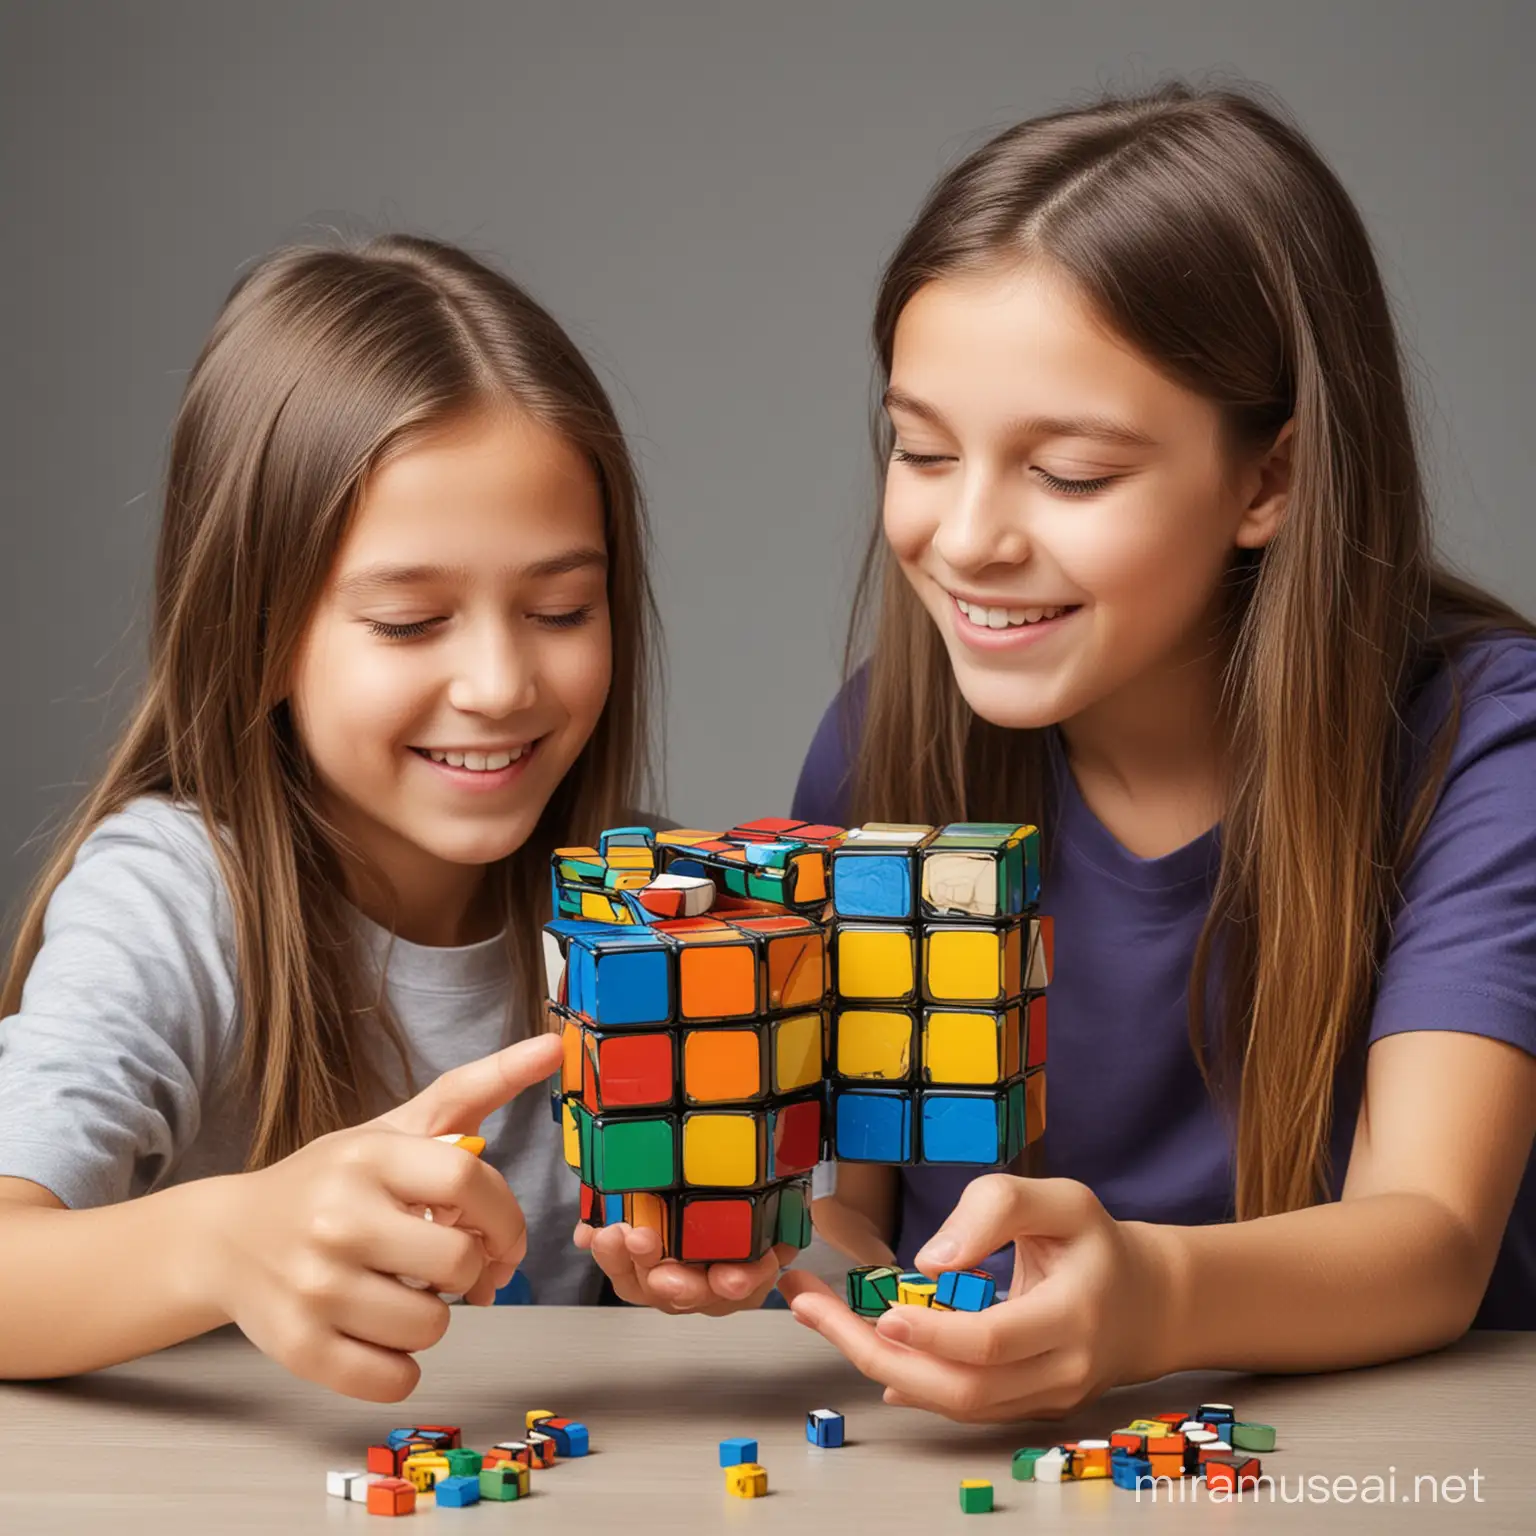 Young Students Mastering Rubiks Cubes Fun Learning Activity Flyer Design